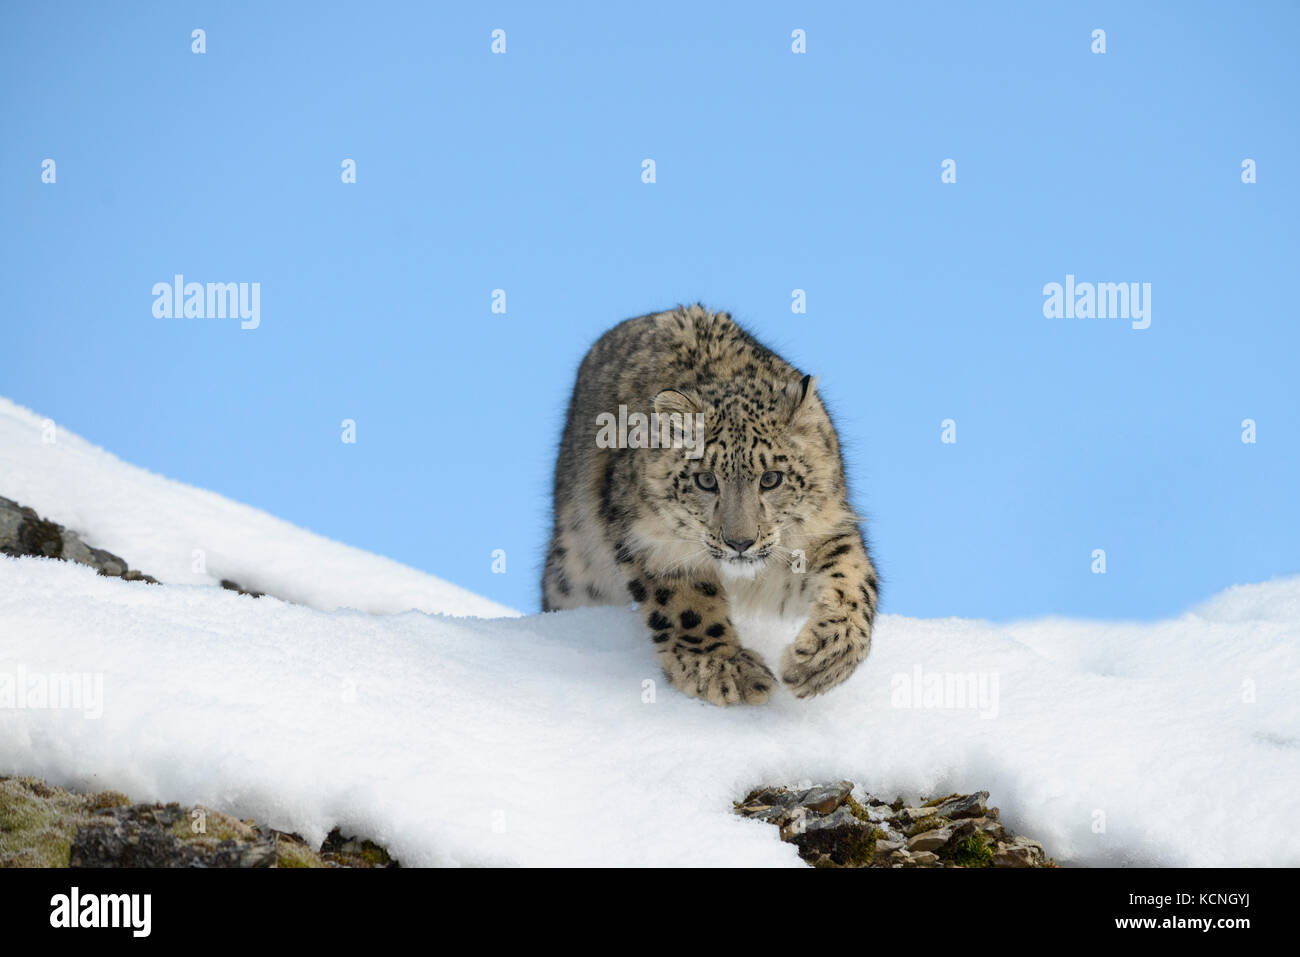 Snow Leopard, Panthera uncia, in snow and rocks. Endangered species. Captive animal. Stock Photo